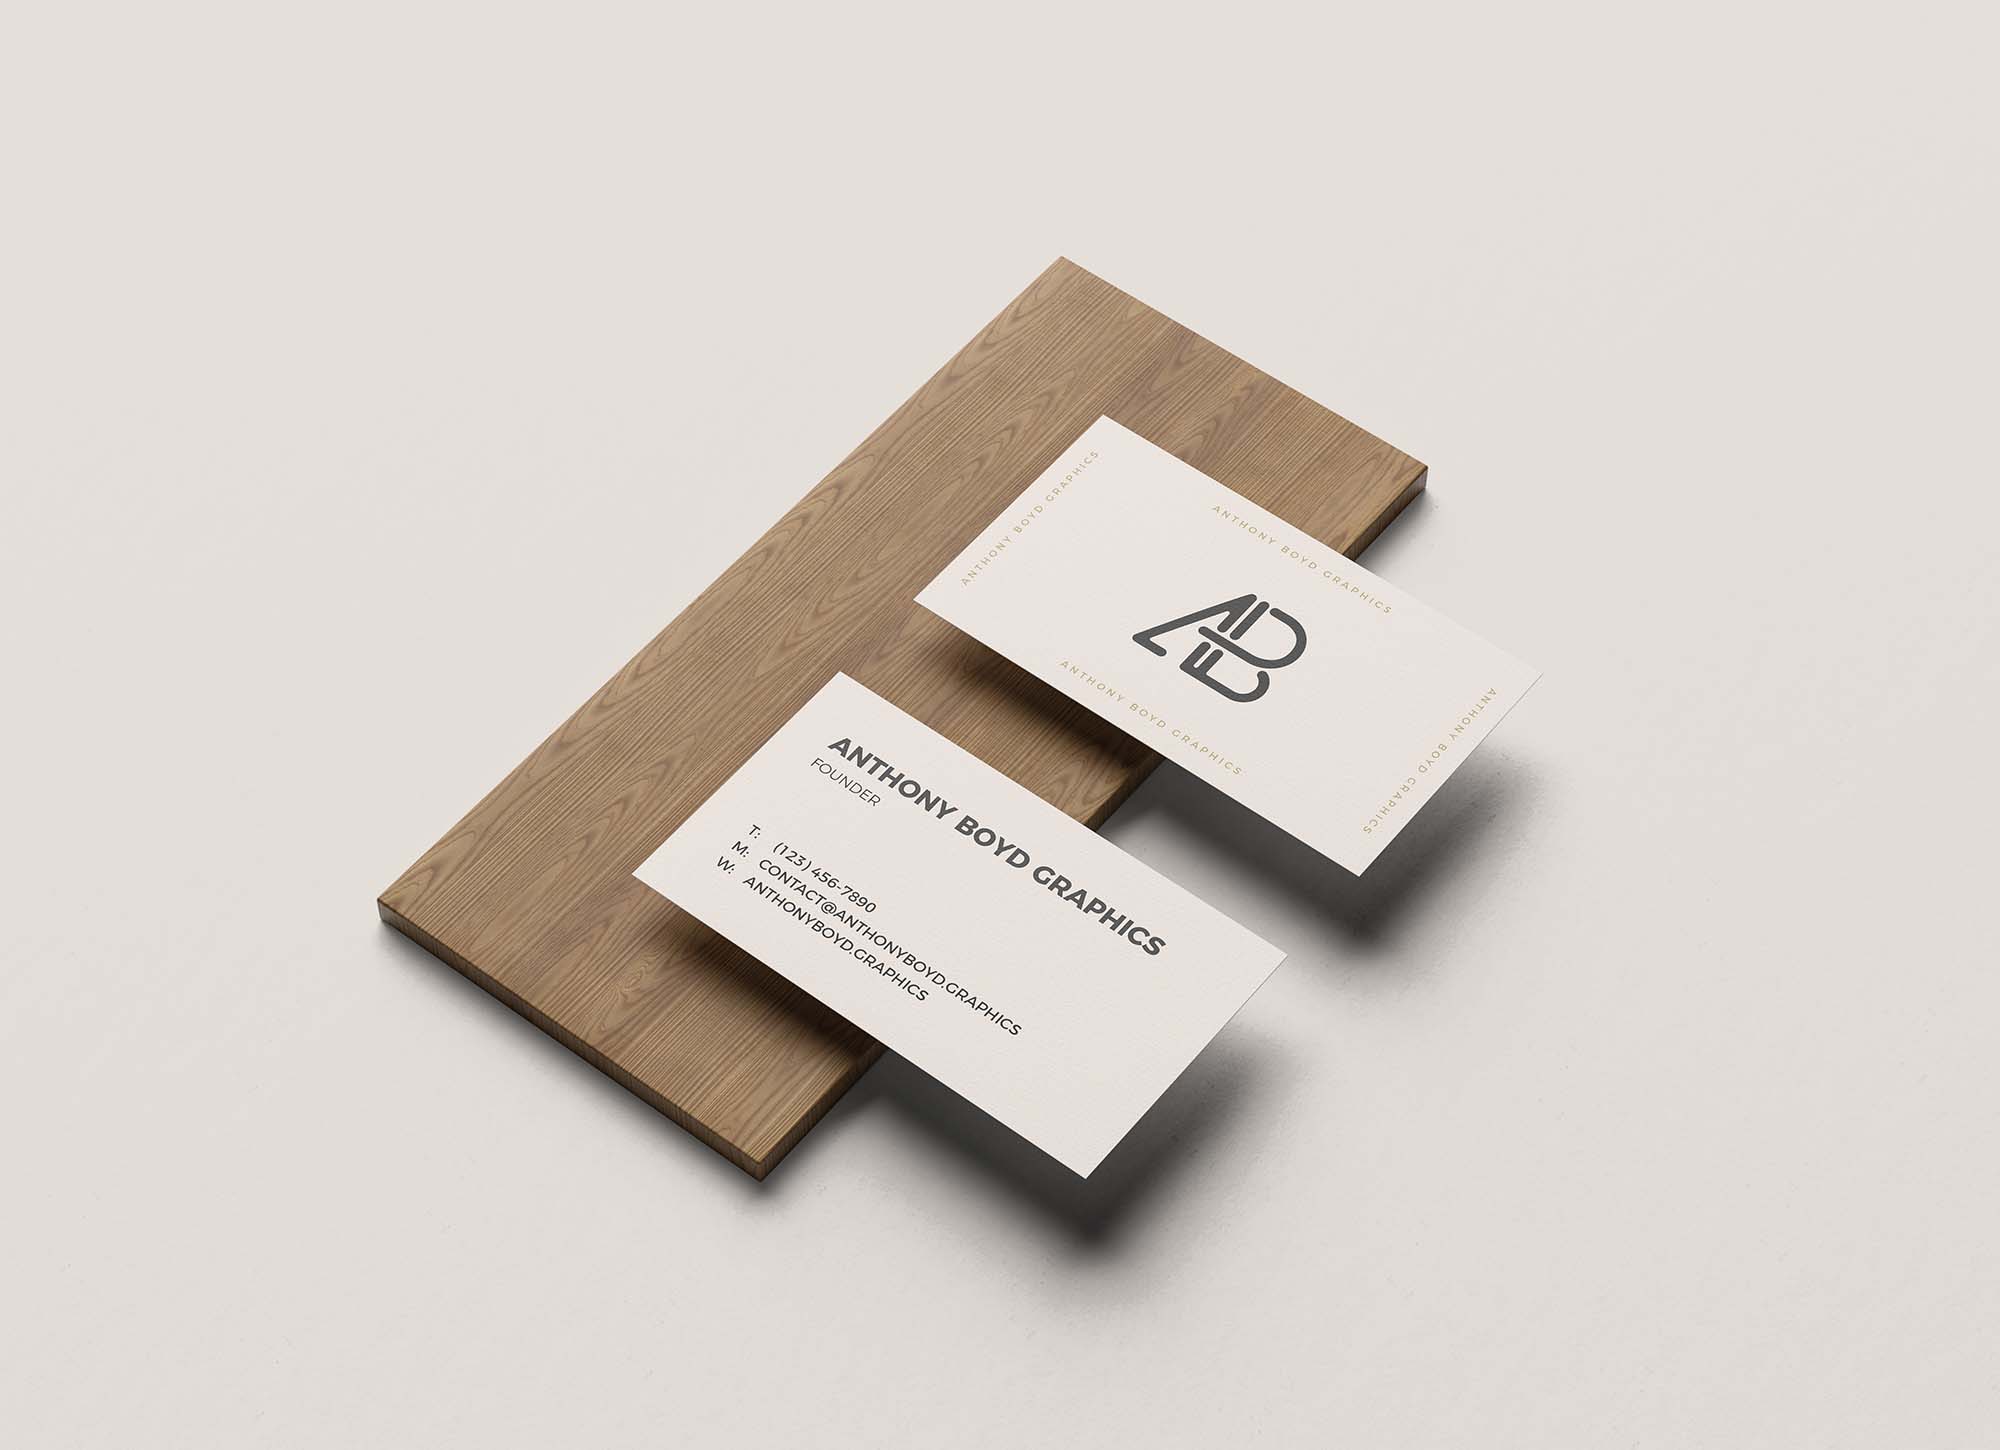 Top 2 Business Cards on Board Mockup